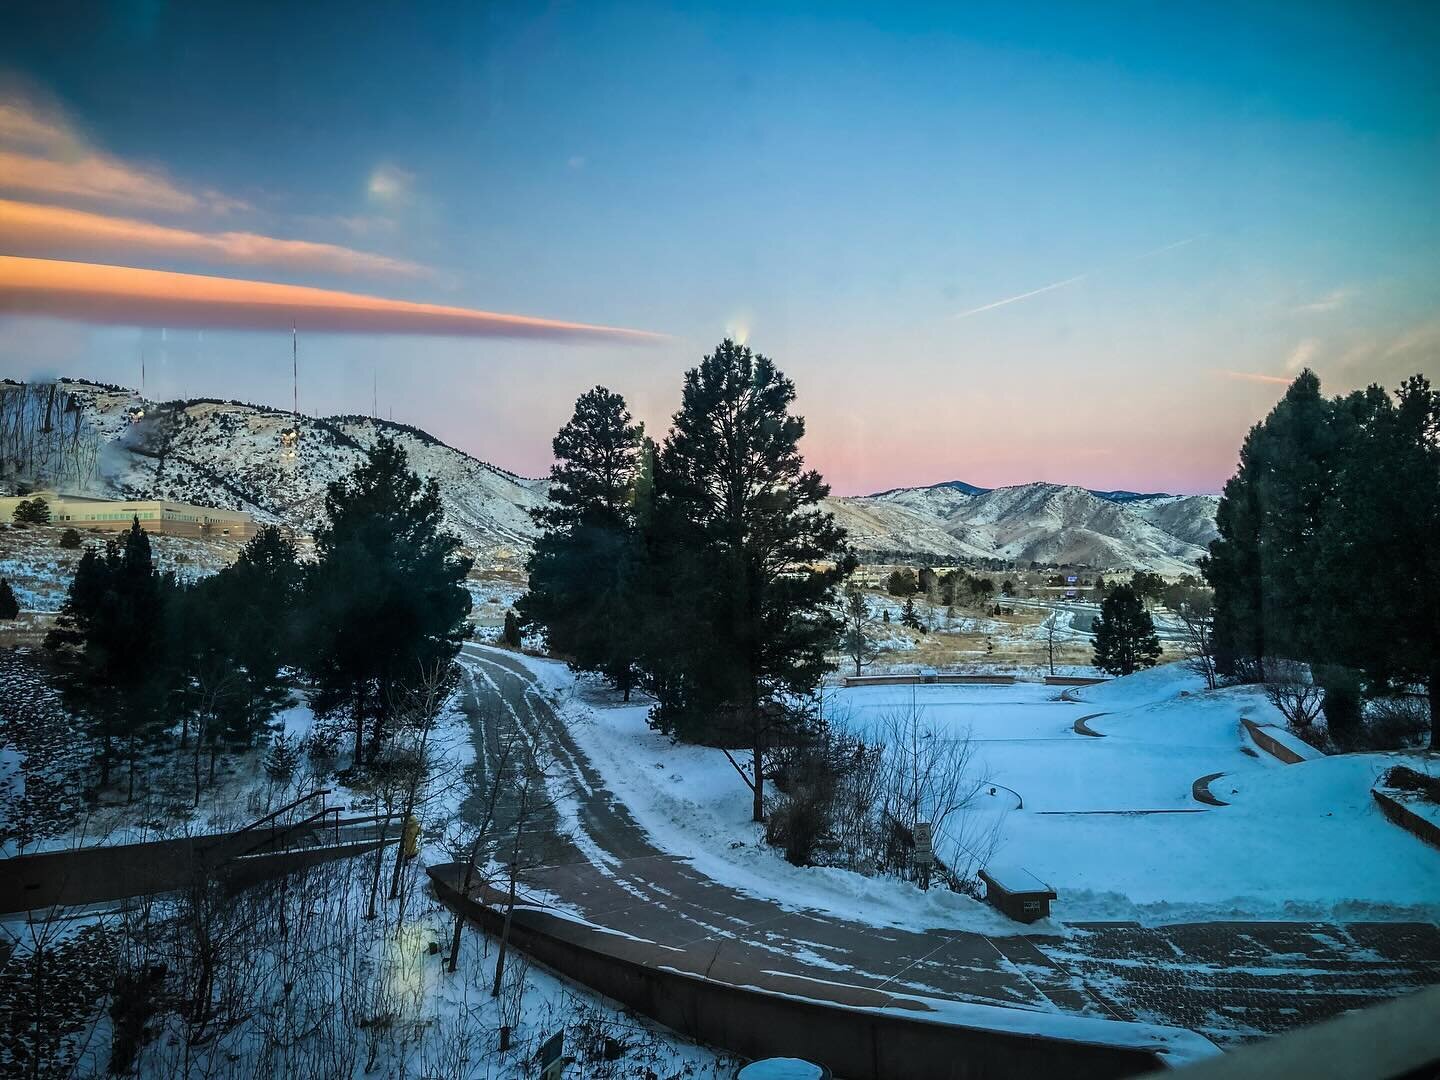 Beautiful morning views from the courthouse this week. One of the perks of getting up before sunrise. 🥰☀️☕️ ❤️❤️❤️